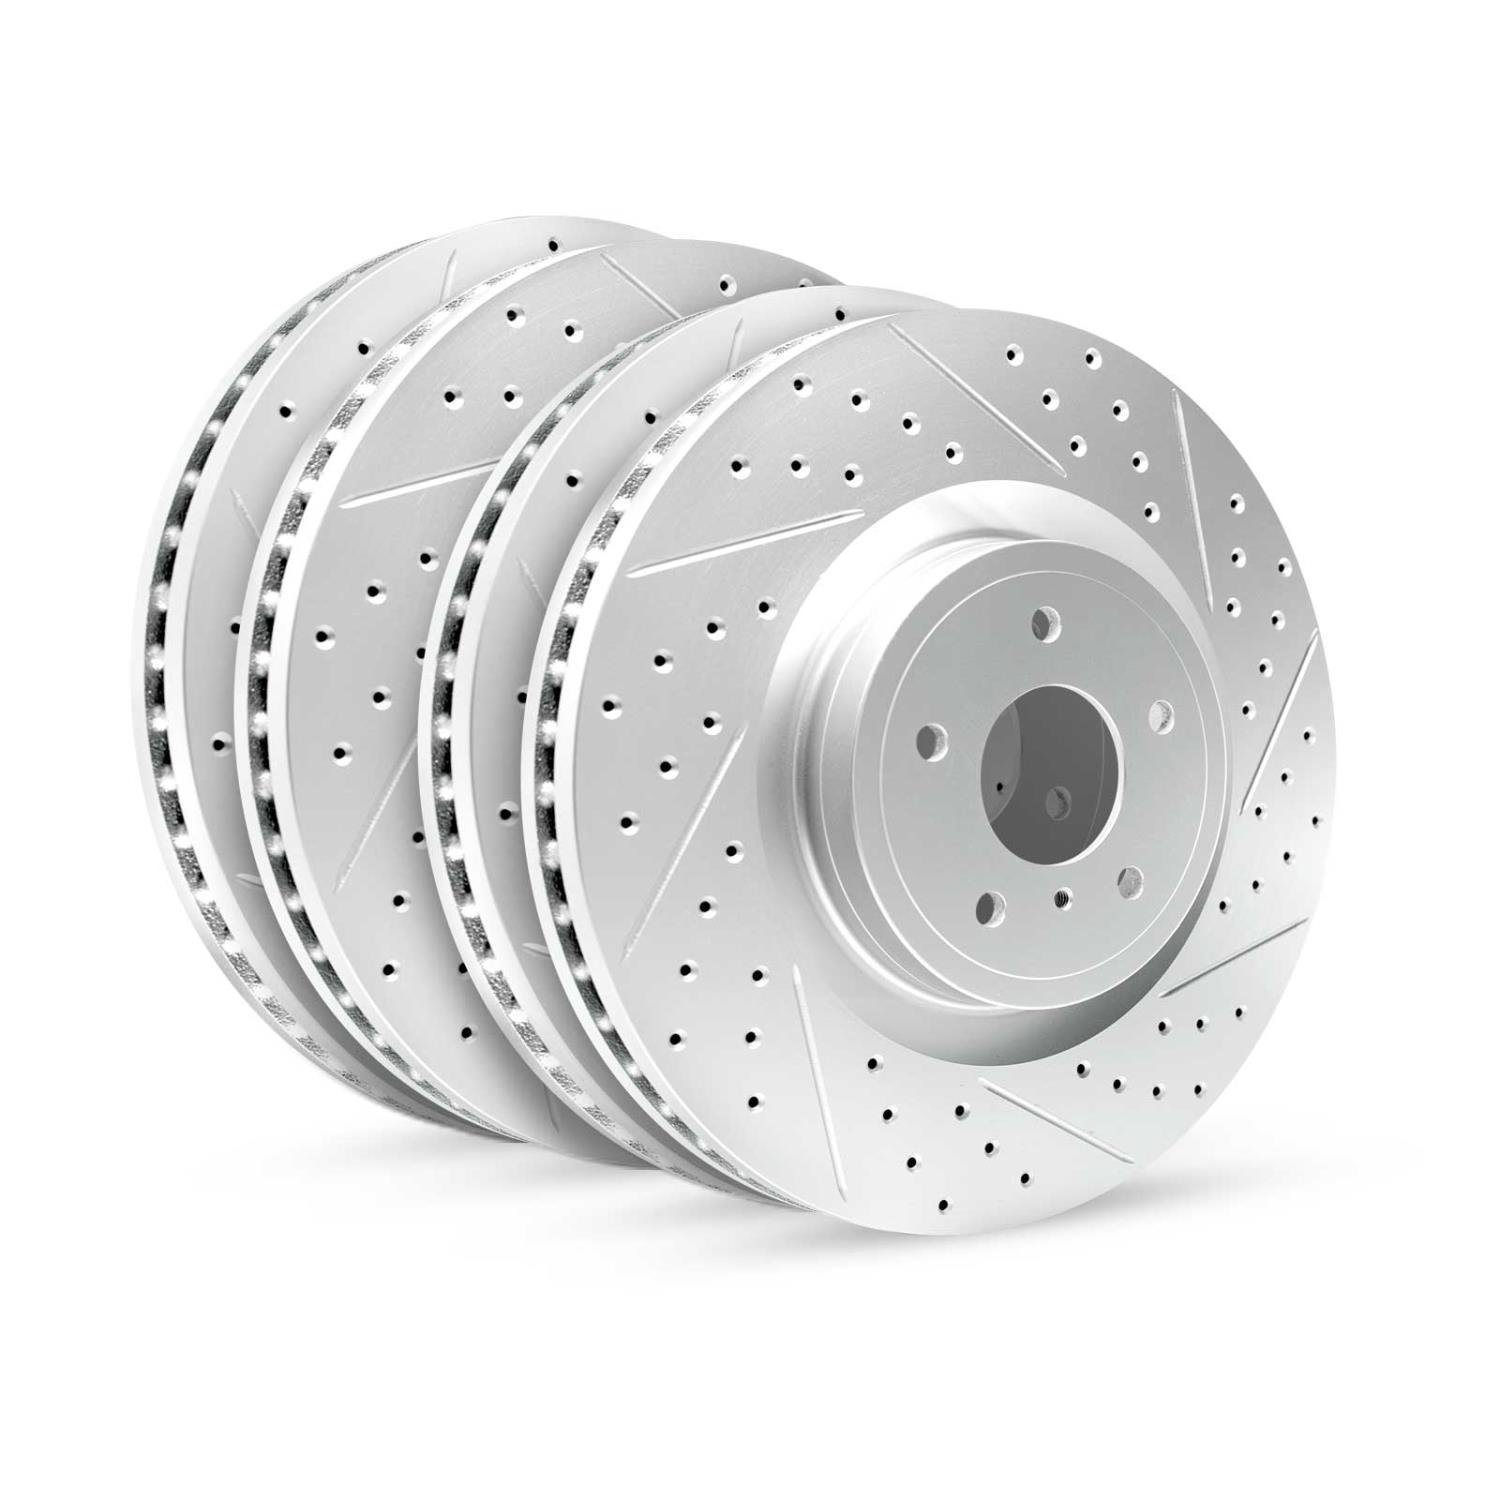 GEO-Carbon Drilled/Slotted Rotors, 1997-2000 BMW, Position: